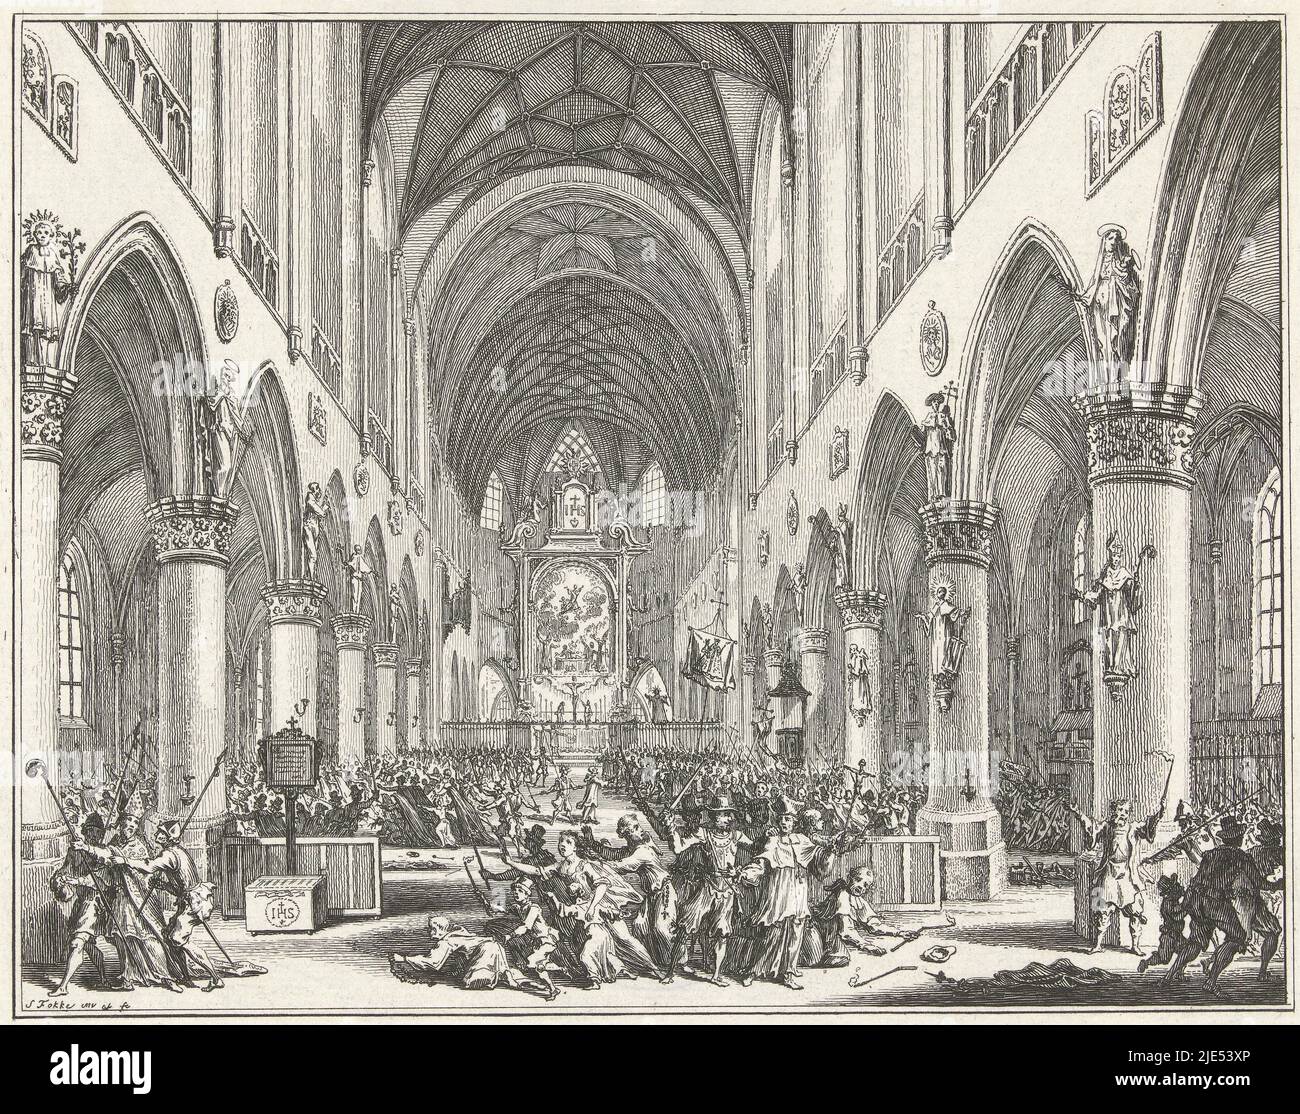 St. Bavo's Church in Haarlem stormed during noon prayer (De Noon) by State soldiers and rioters, 29 May 1578. A view of the interior of the church in which the Catholic clergy are chased away and vandalised, in which the priest Balling is murdered. This event is known as De Haarlemse Noon, Priest Balling murdered in St Bavo, 1578., print maker: Simon Fokke, (mentioned on object), Simon Fokke, (mentioned on object), Northern Netherlands, 1747 - 1759, paper, etching, h 172 mm × w 206 mm Stock Photo